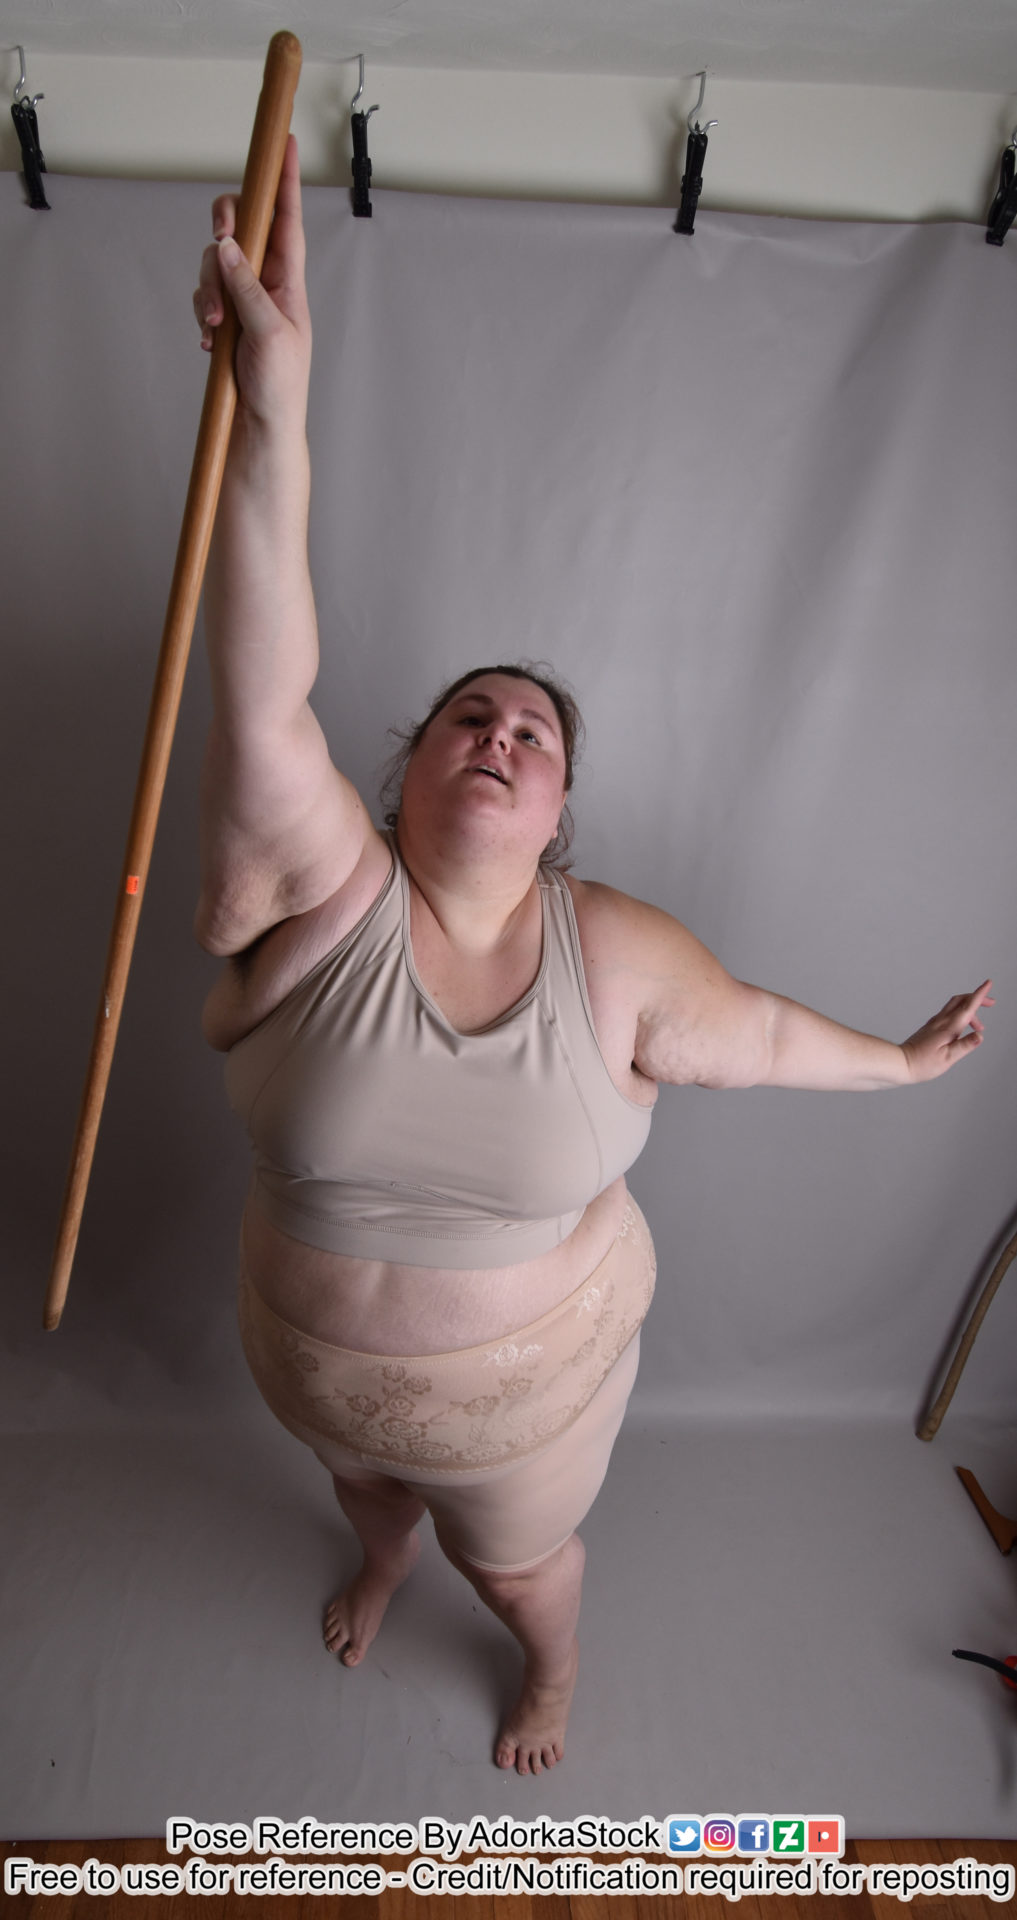 fat female white pose reference model from a high perspective, reaching up one hand with a staff